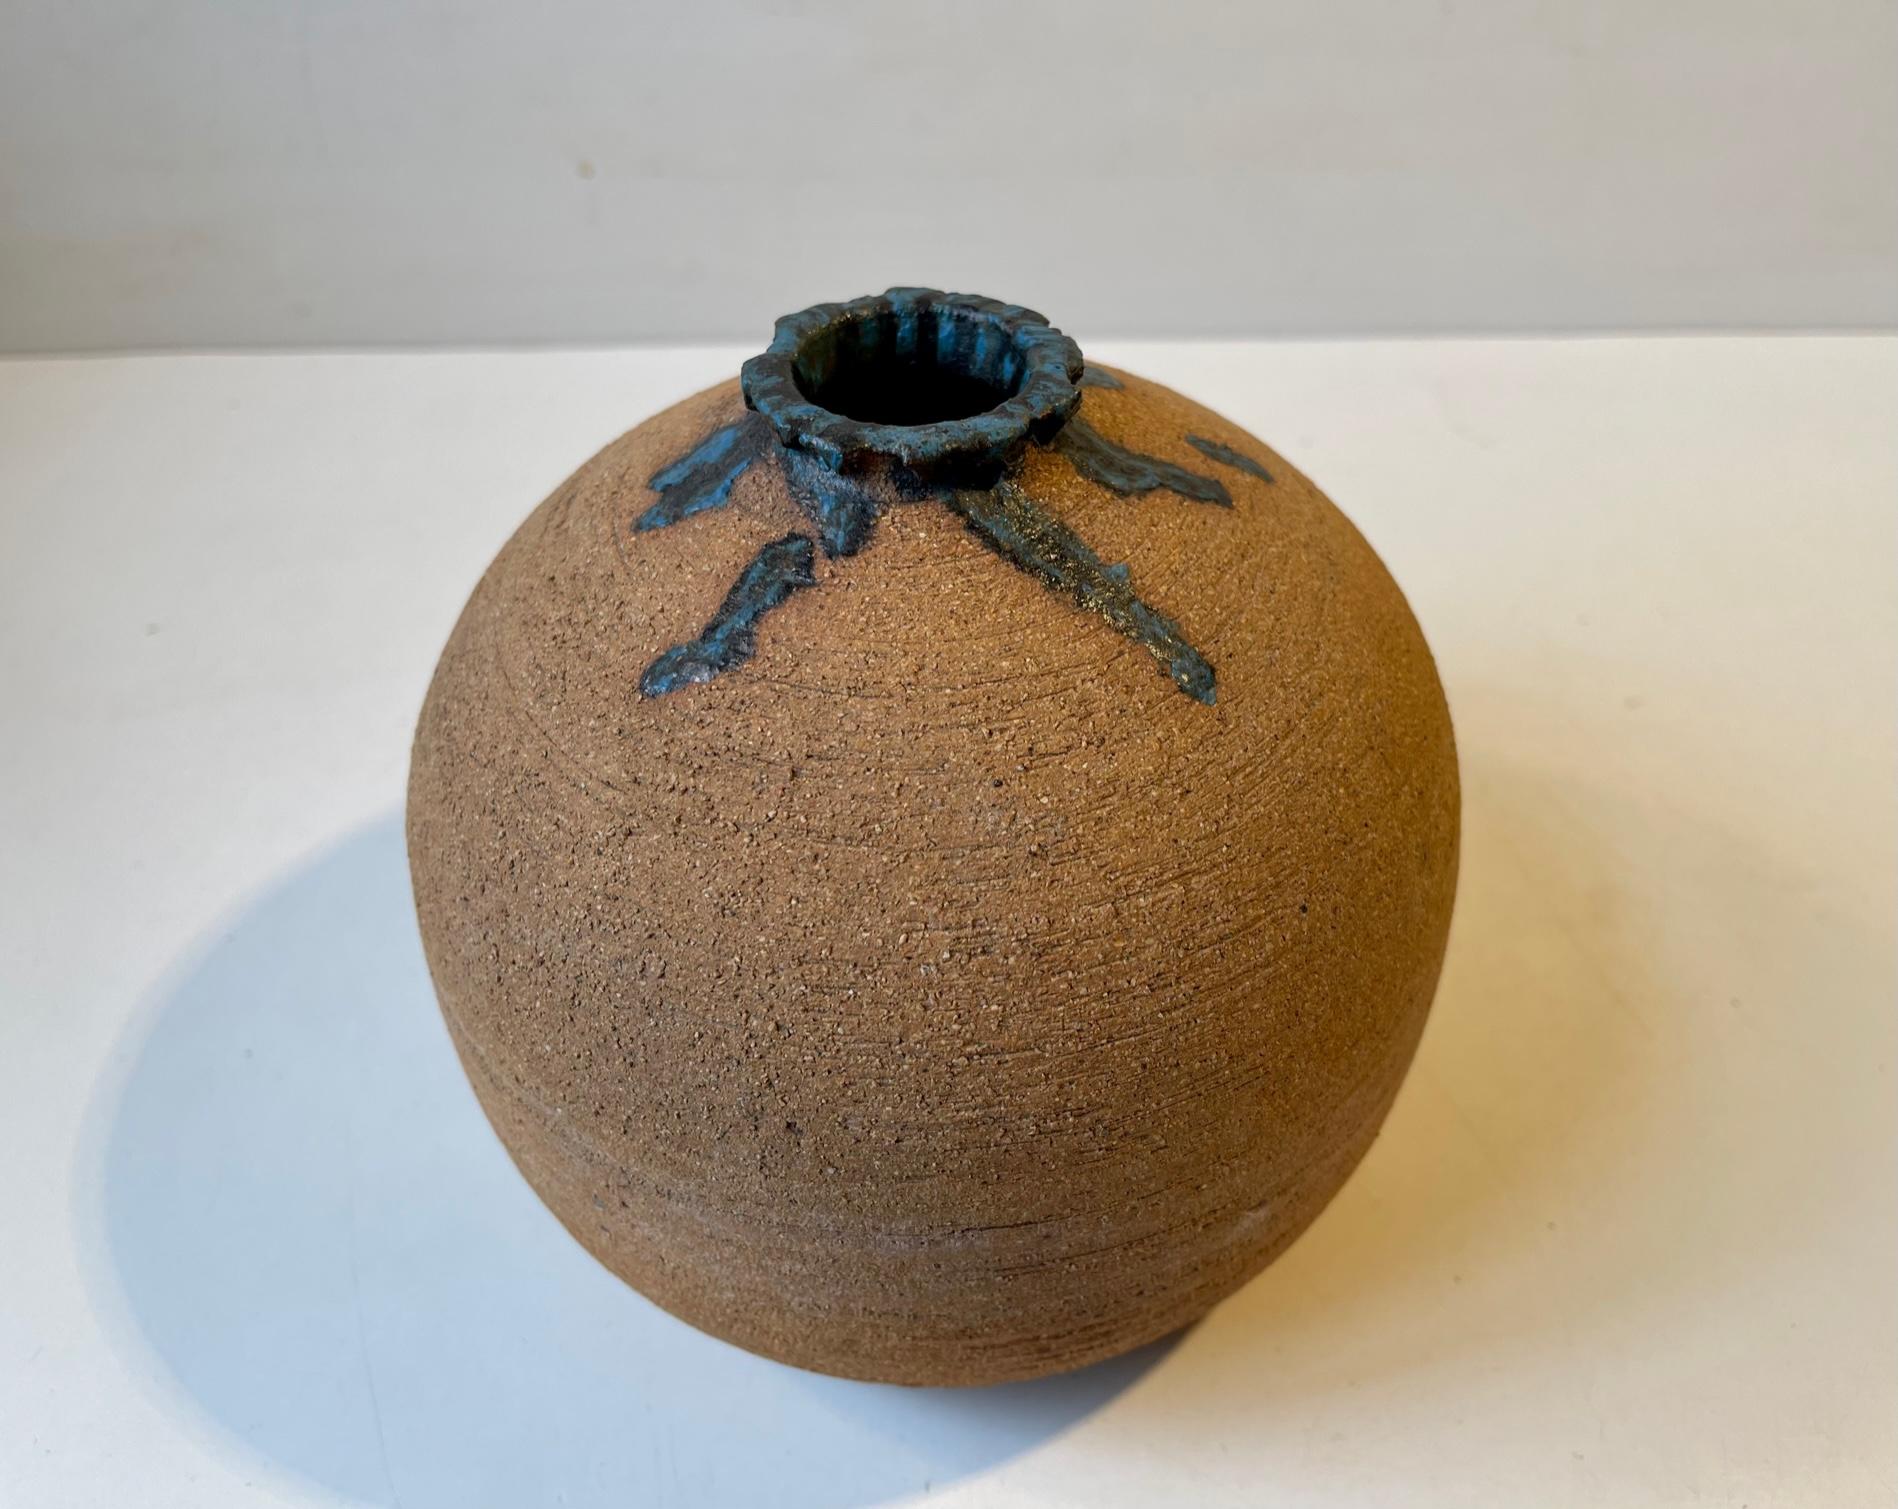 Interesting ball or onion shaped vase in un-glazed ceramic. It features intended spiky imperfections to its neck that are high-lighted with blue and black drip glaze. A funny mix of deconstructionism and constructivism. Its by an unidentified